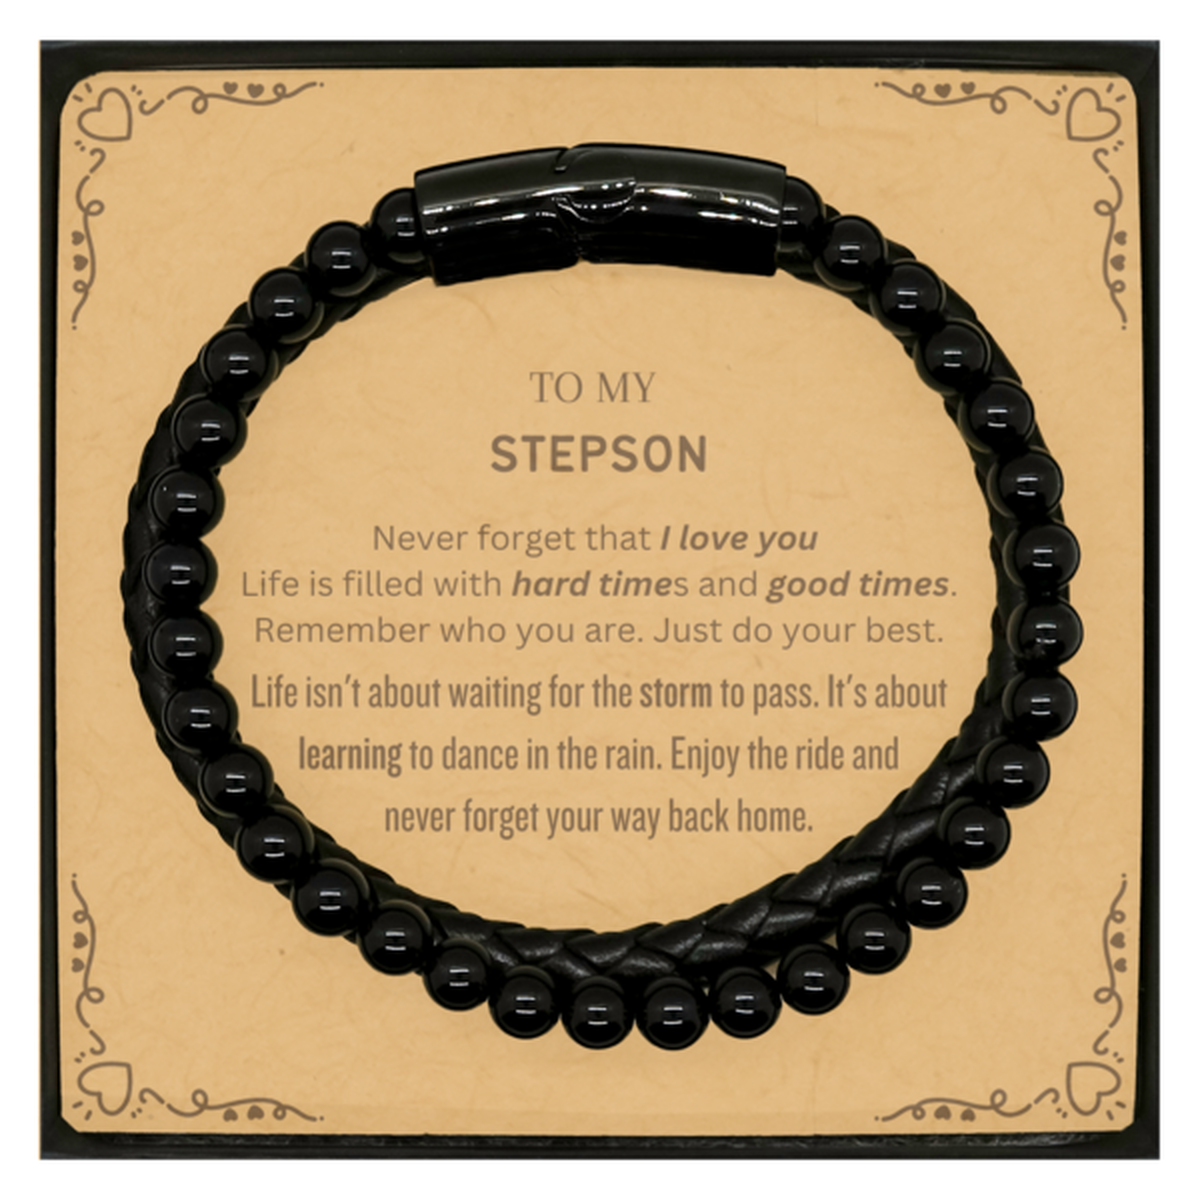 Christmas Stepson Stone Leather Bracelets Gifts, To My Stepson Birthday Thank You Gifts For Stepson, Graduation Unique Gifts For Stepson To My Stepson Never forget that I love you life is filled with hard times and good times. Remember who you are. Just d